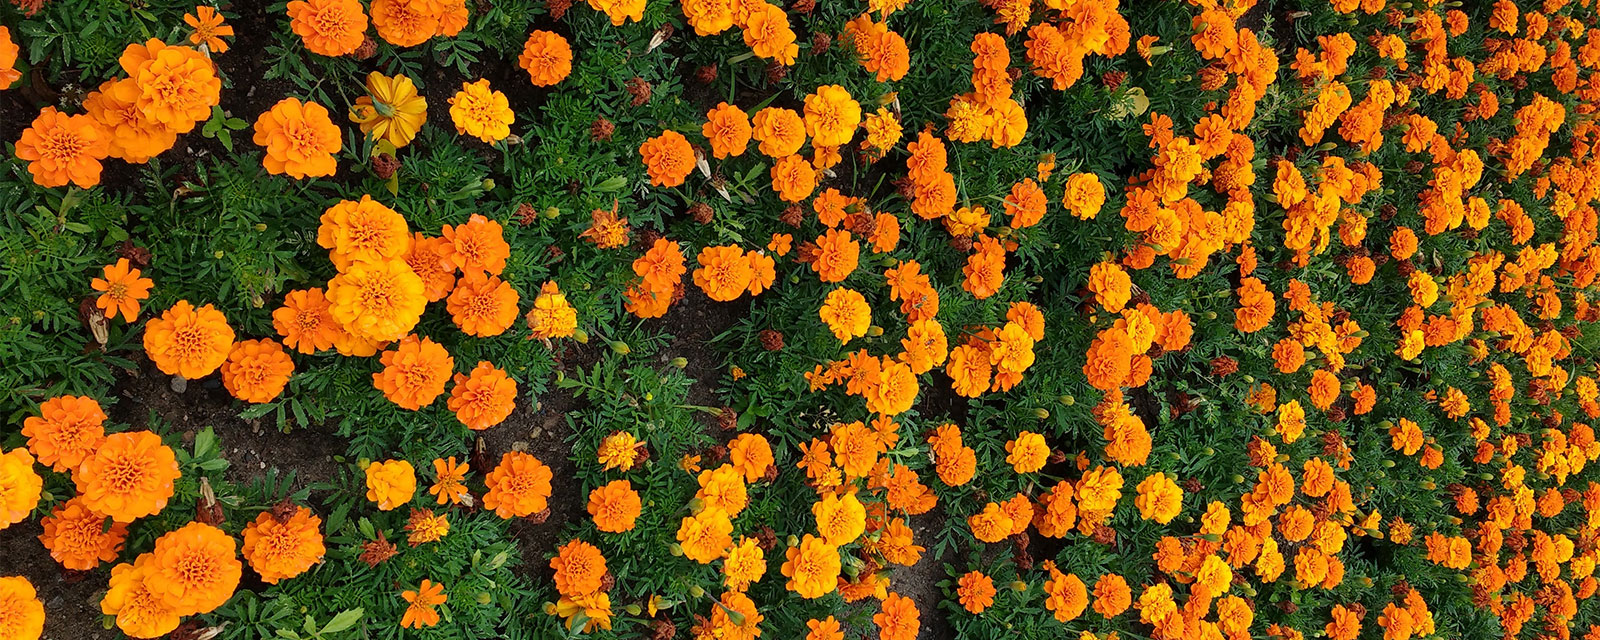 marigolds photo by Brenna Busse